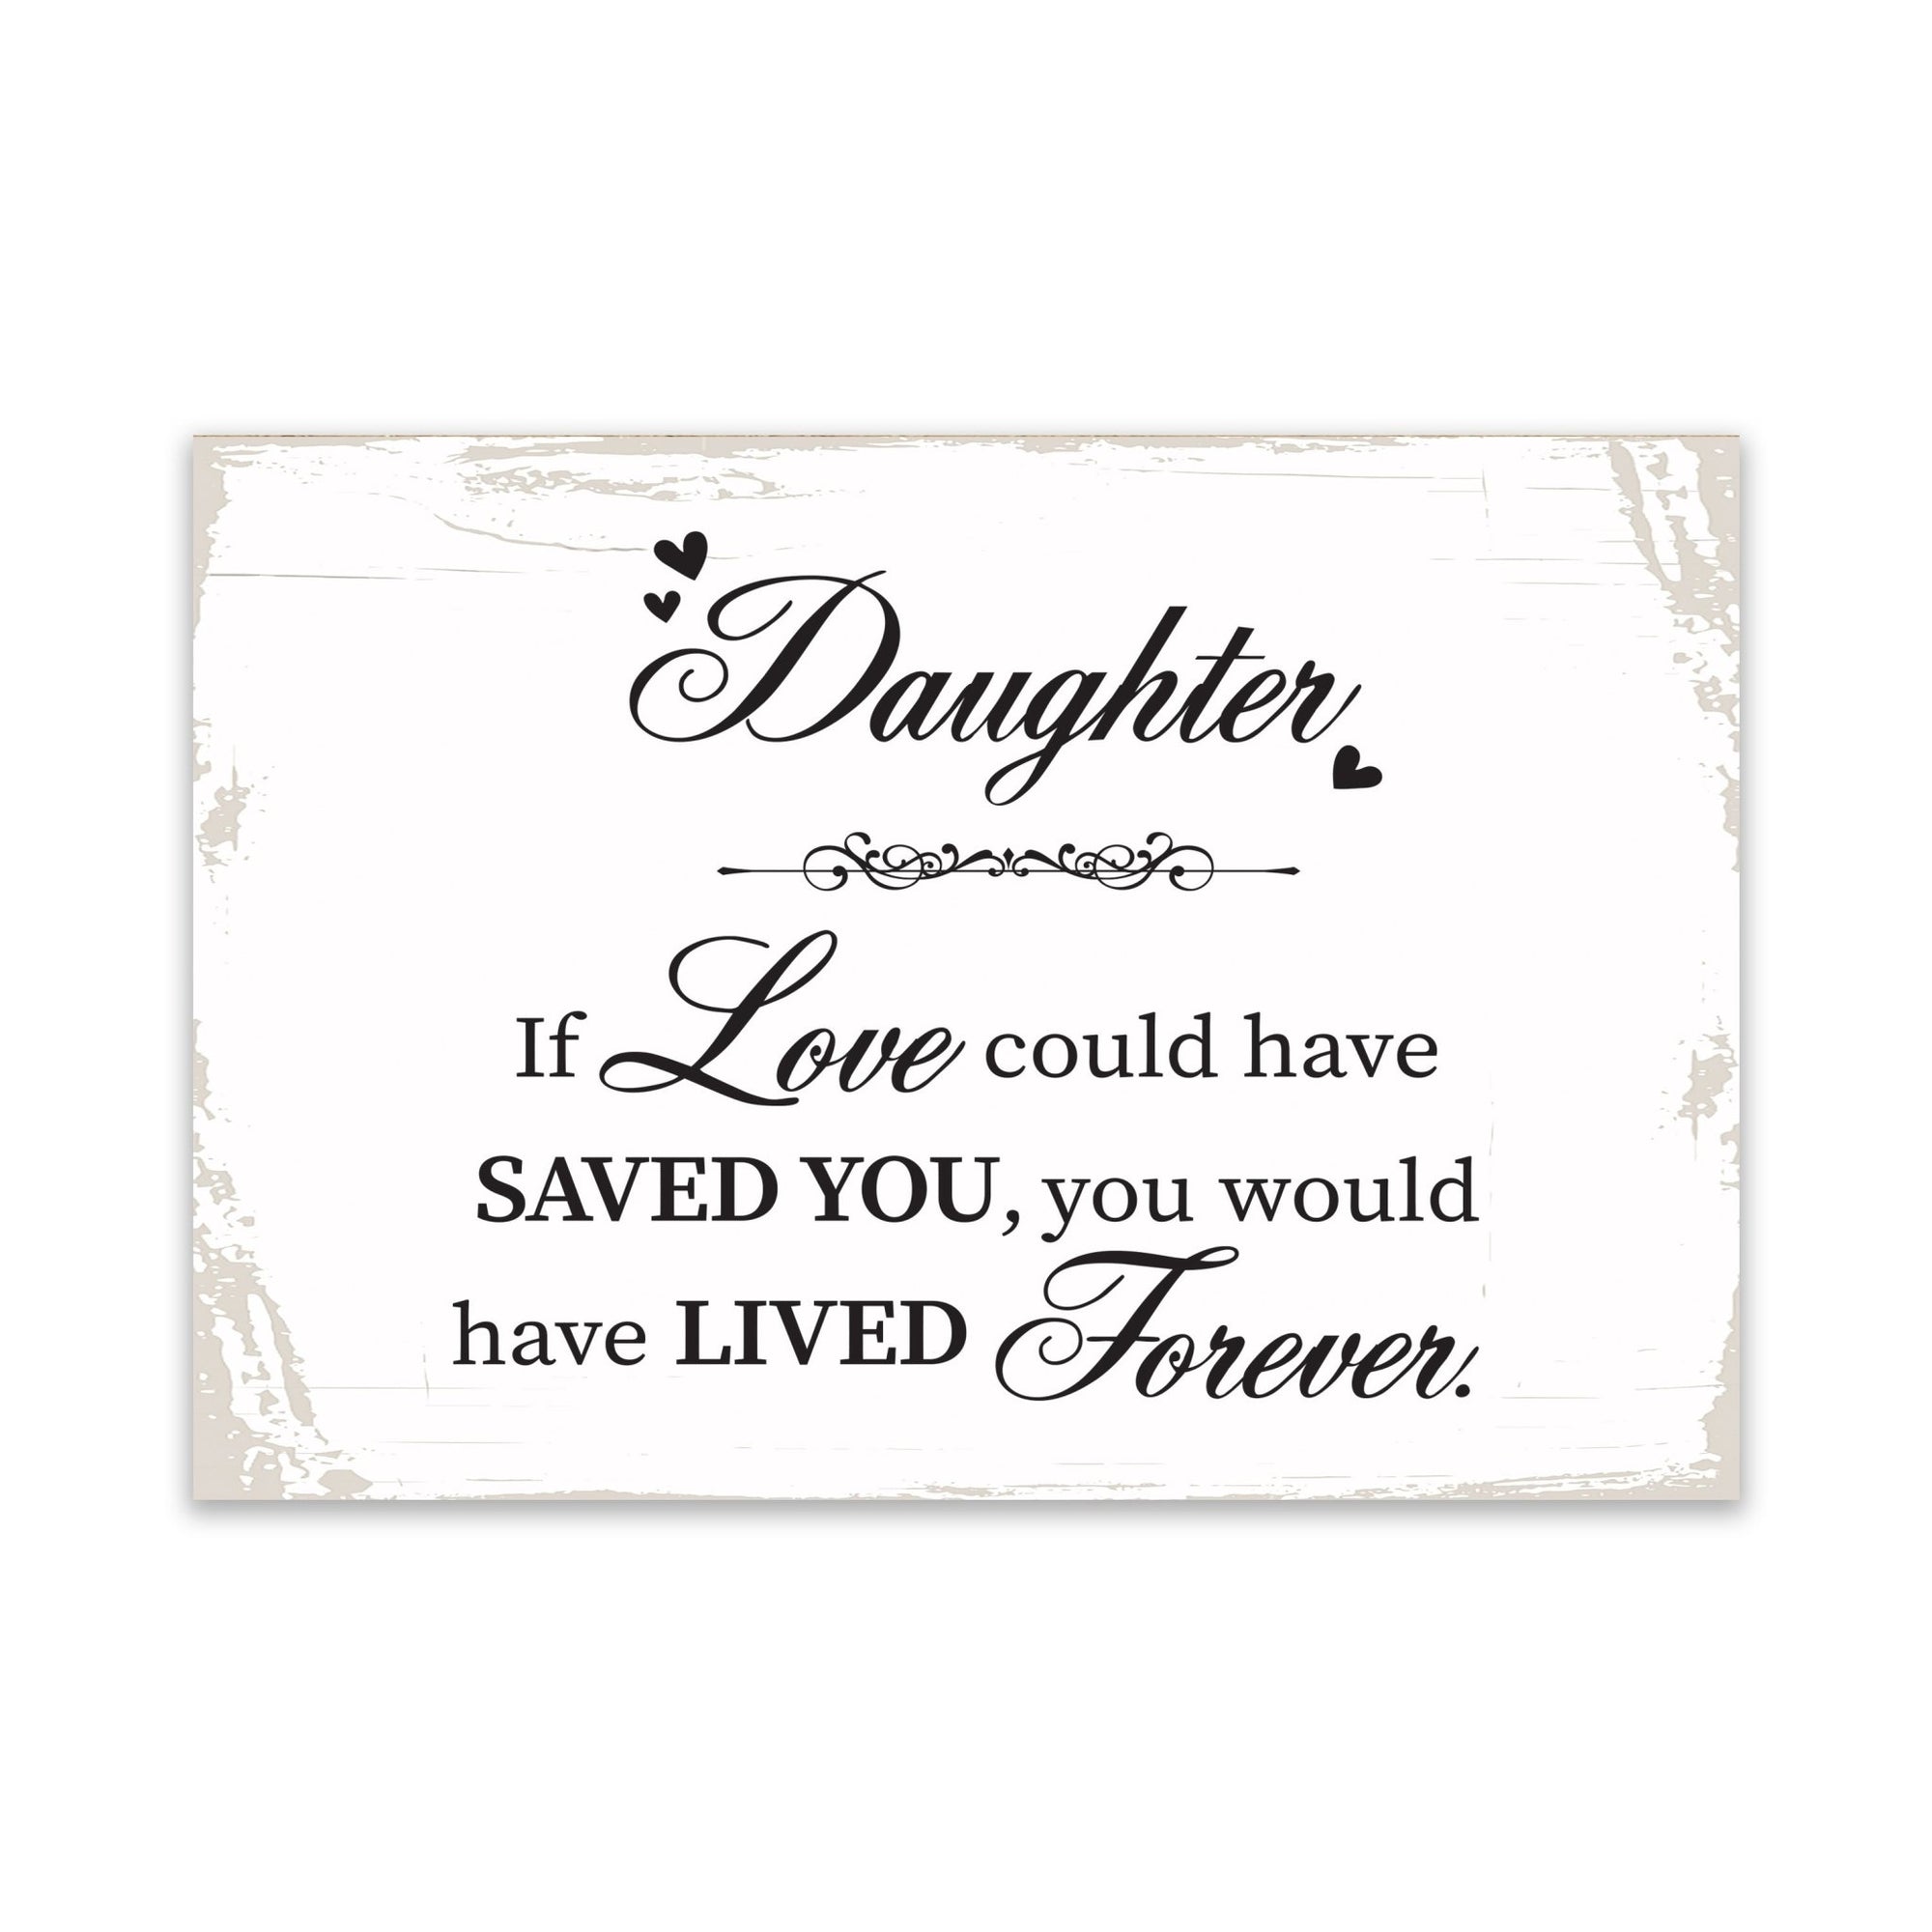 Modern Inspirational Memorial 5.5x 8 inches Wooden Sign Daughter, If Love Could - Plaque Tabletop Decoration Loss of Loved One Bereavement Sympathy Keepsake - LifeSong Milestones